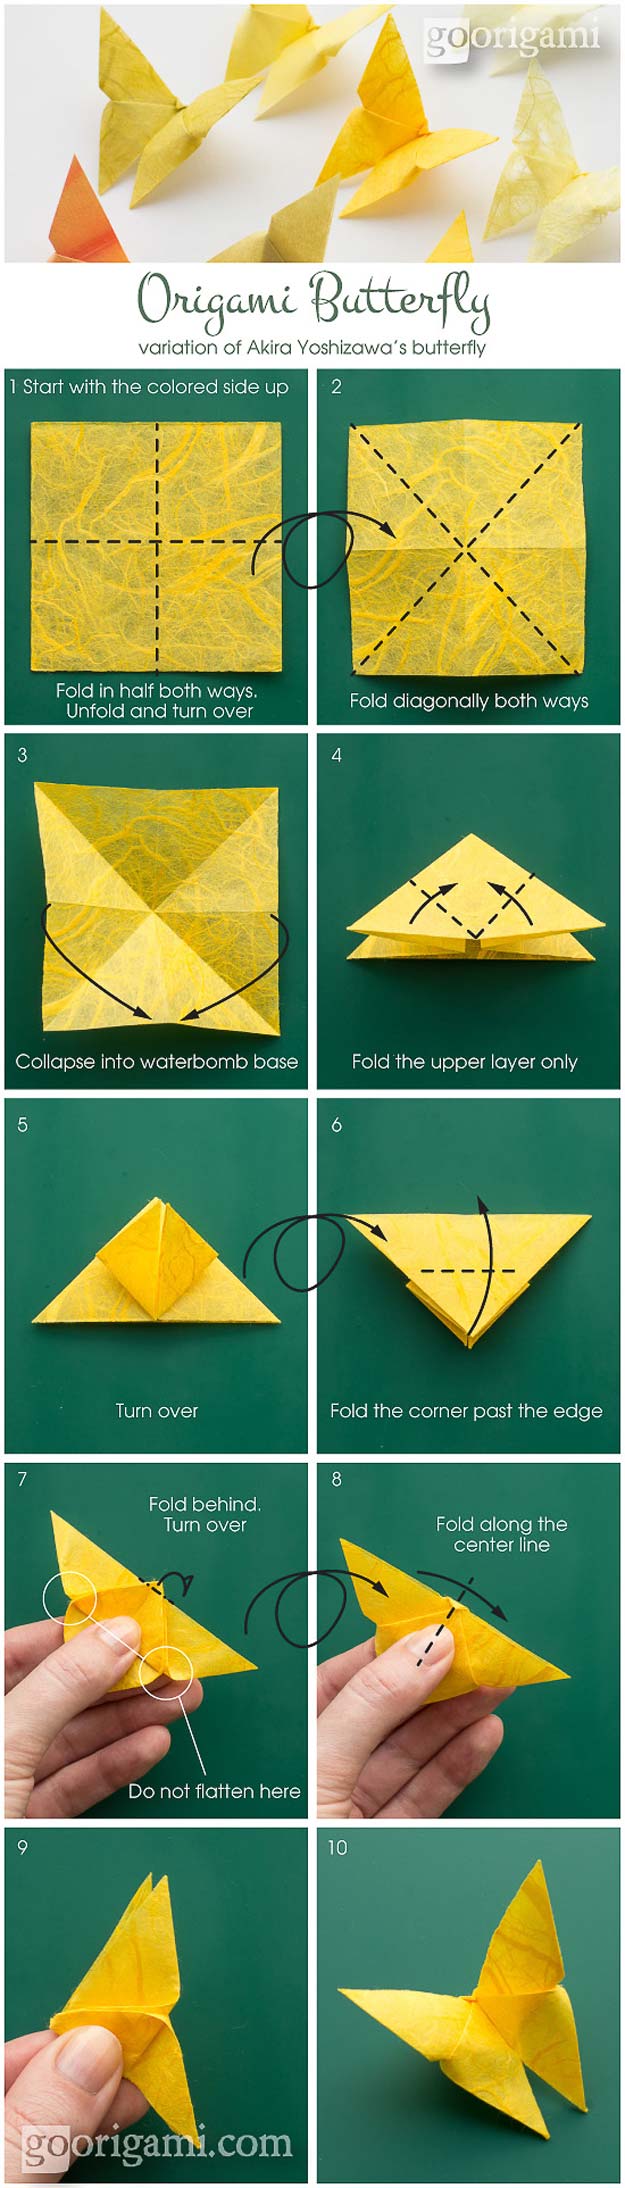 Best Origami Tutorials - Origami Butterfly - Easy DIY Origami Tutorial Projects for With Instructions for Flowers, Dog, Gift Box, Star, Owl, Buttlerfly, Heart and Bookmark, Animals - Fun Paper Crafts for Teens, Kids and Adults #origami #crafts